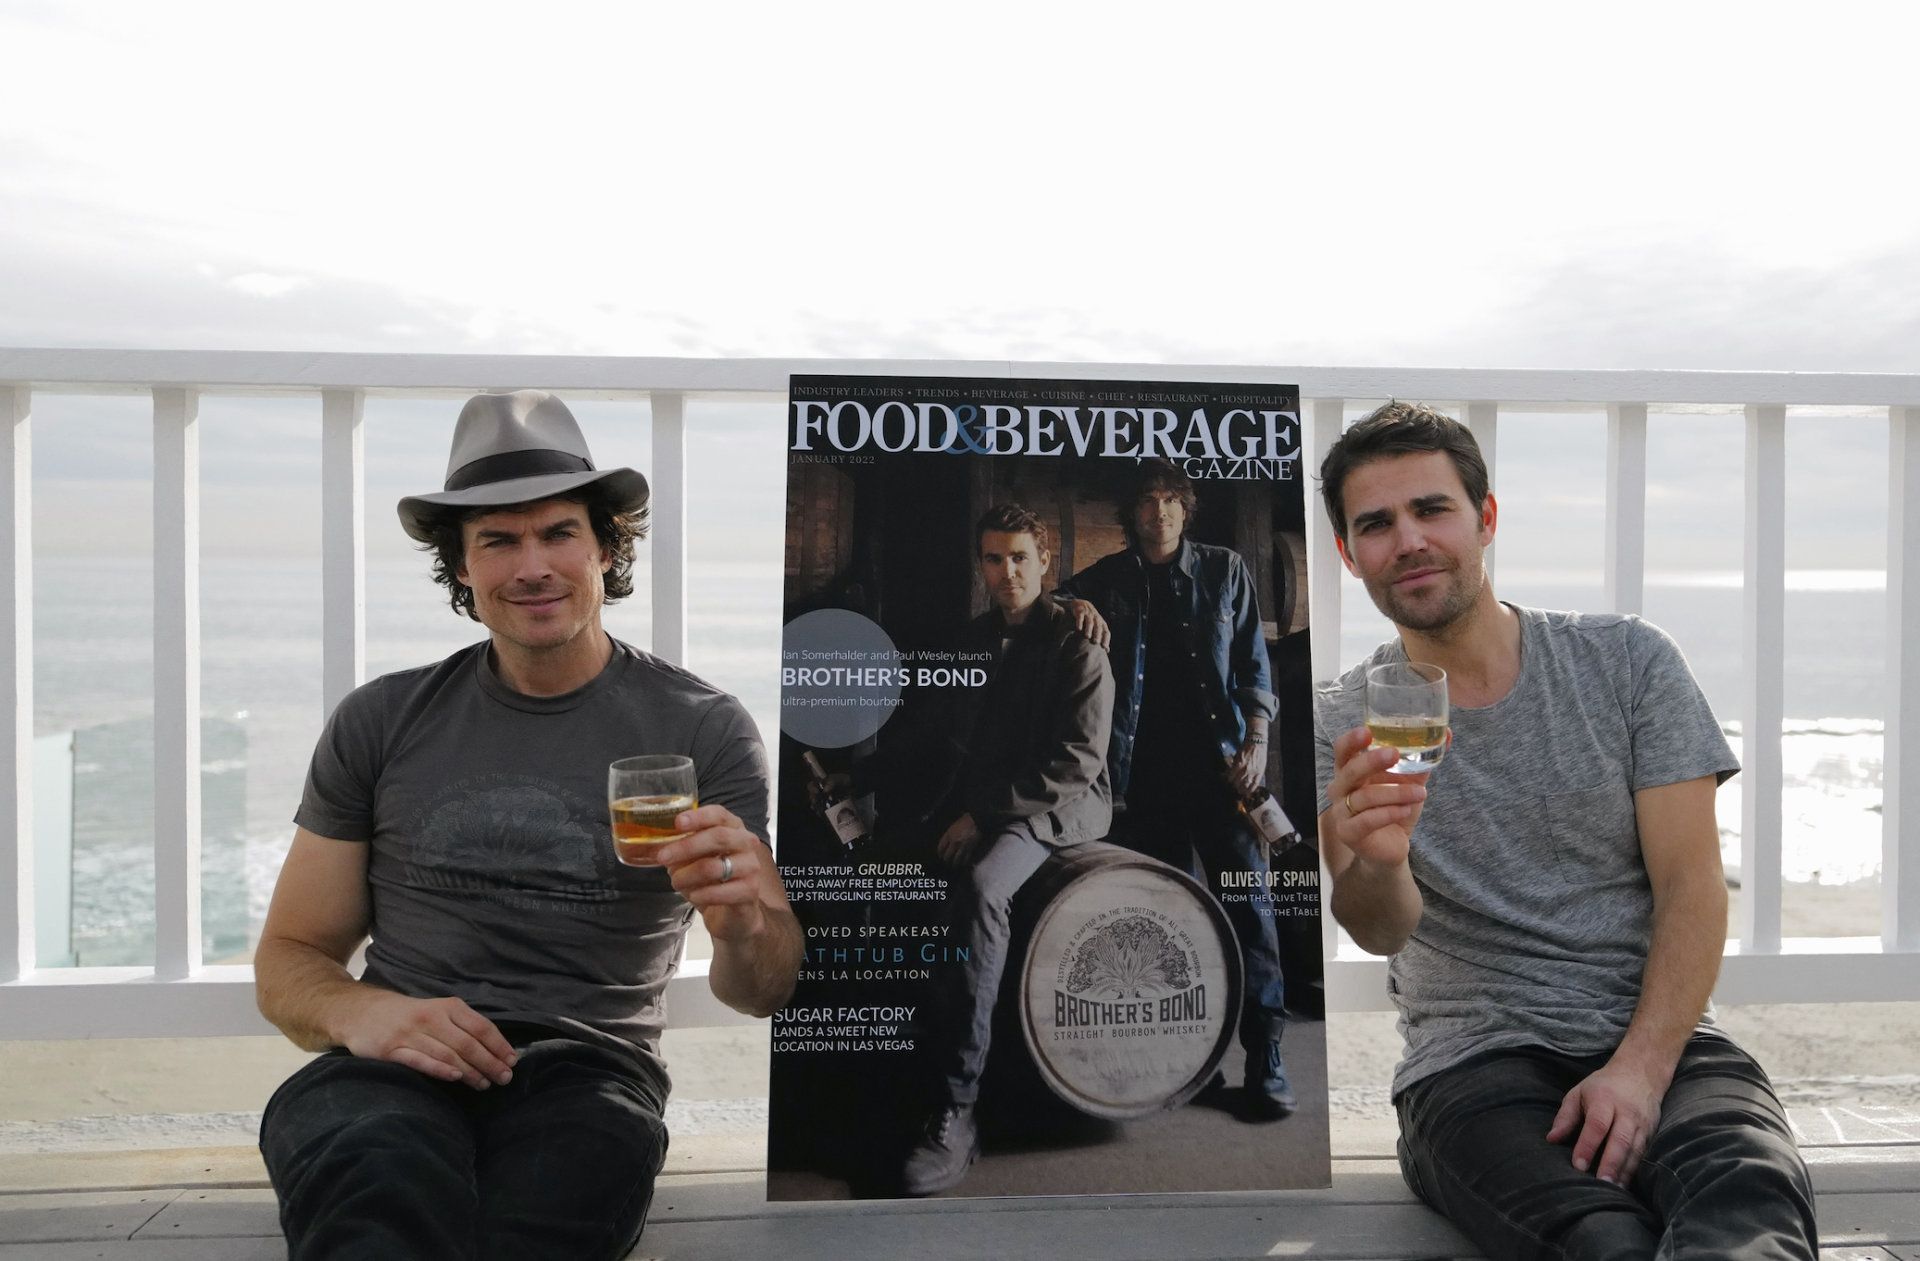 Ian Somerhalder &#038; Paul Wesley Celebrate their Food &#038; Beverage Magazine January 2022 Issue Cover